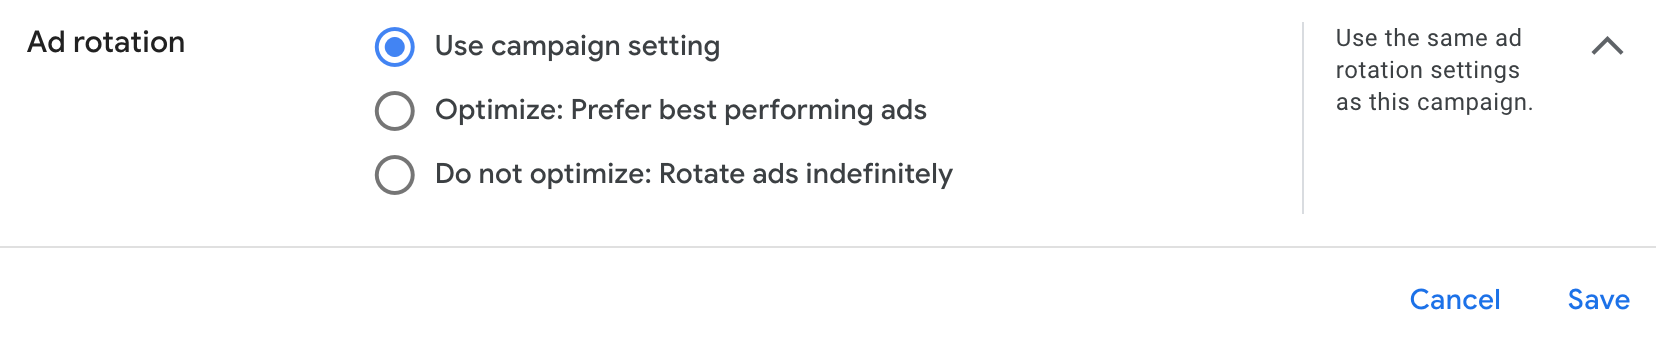 ad rotation setting options in Google Ads